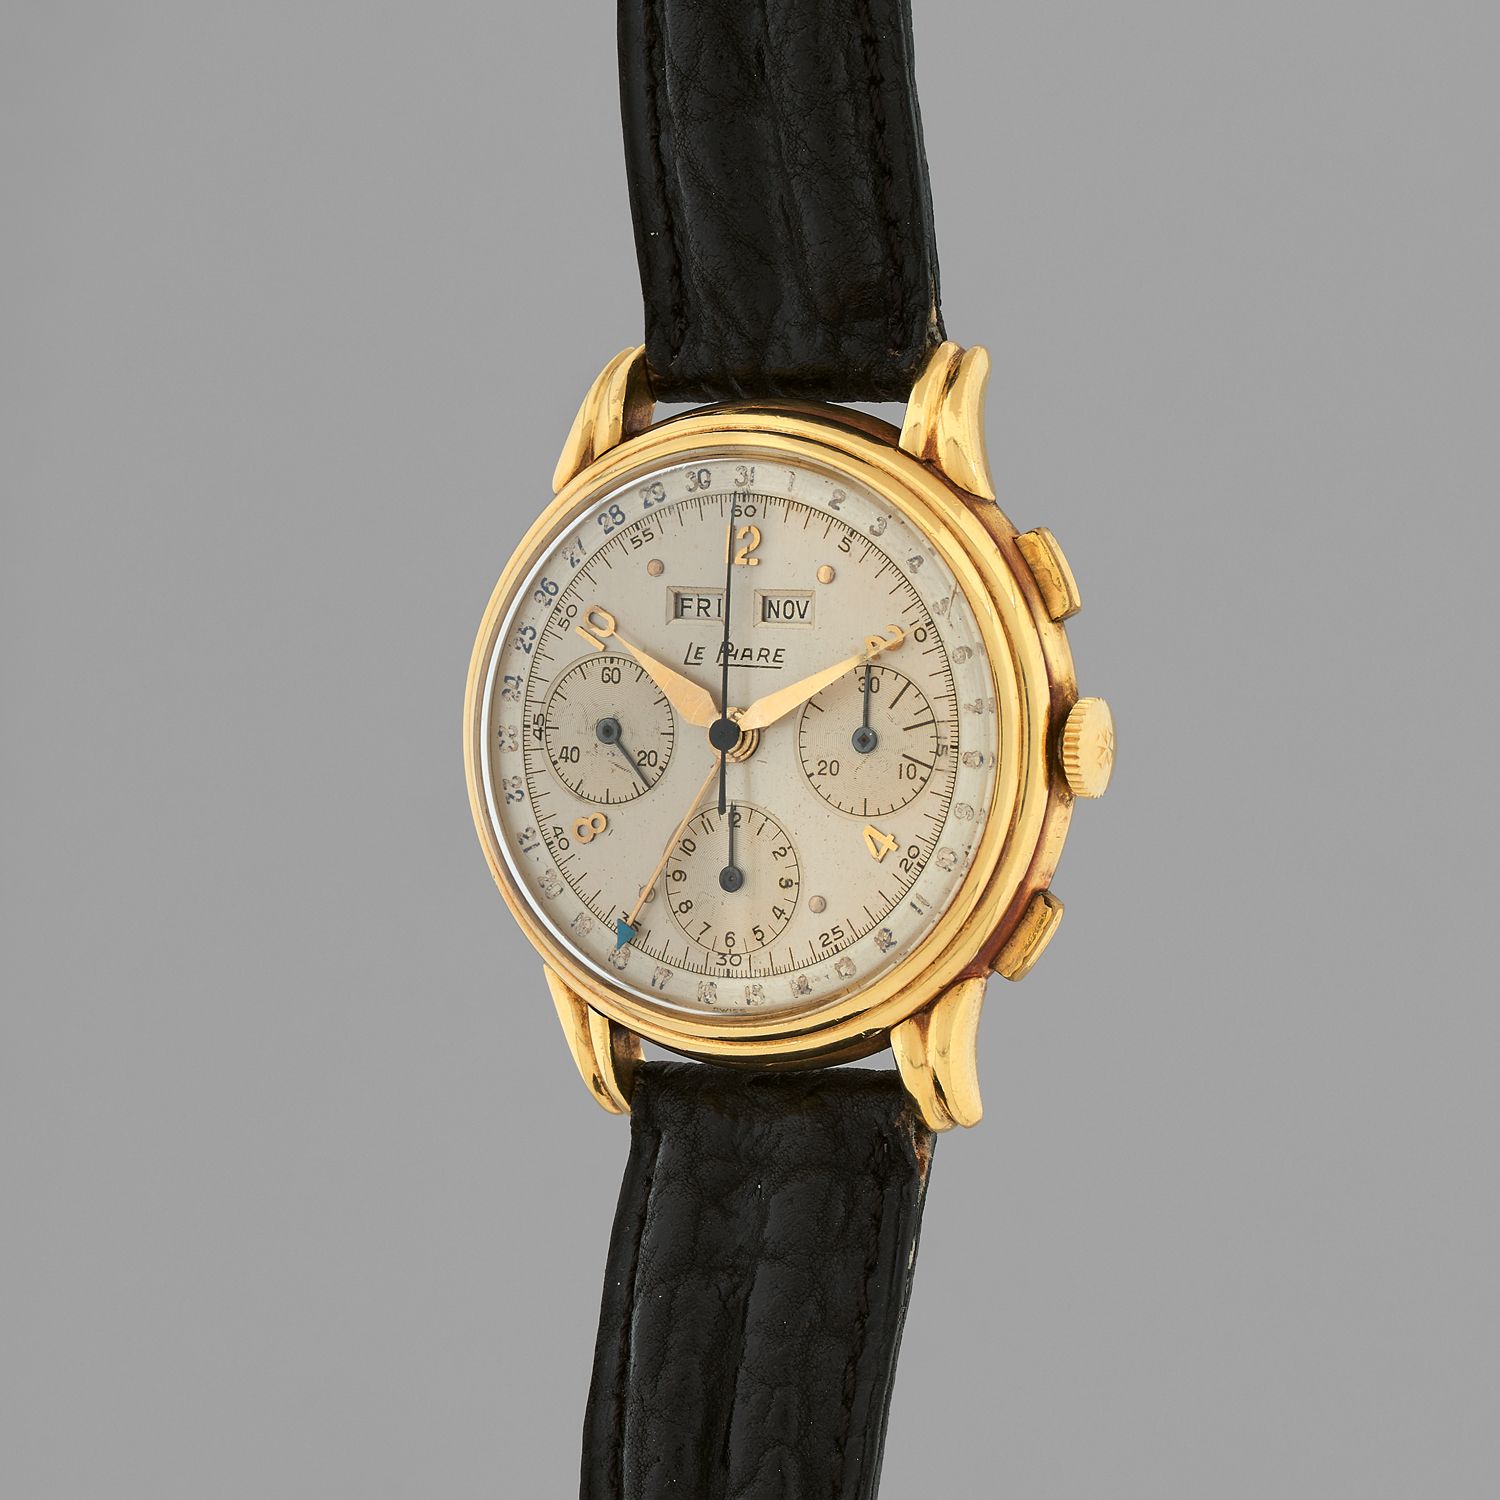 Null LE PHARE
Triple date chronograph.
Circa: 1960.
Case in yellow gold 750/1000&hellip;